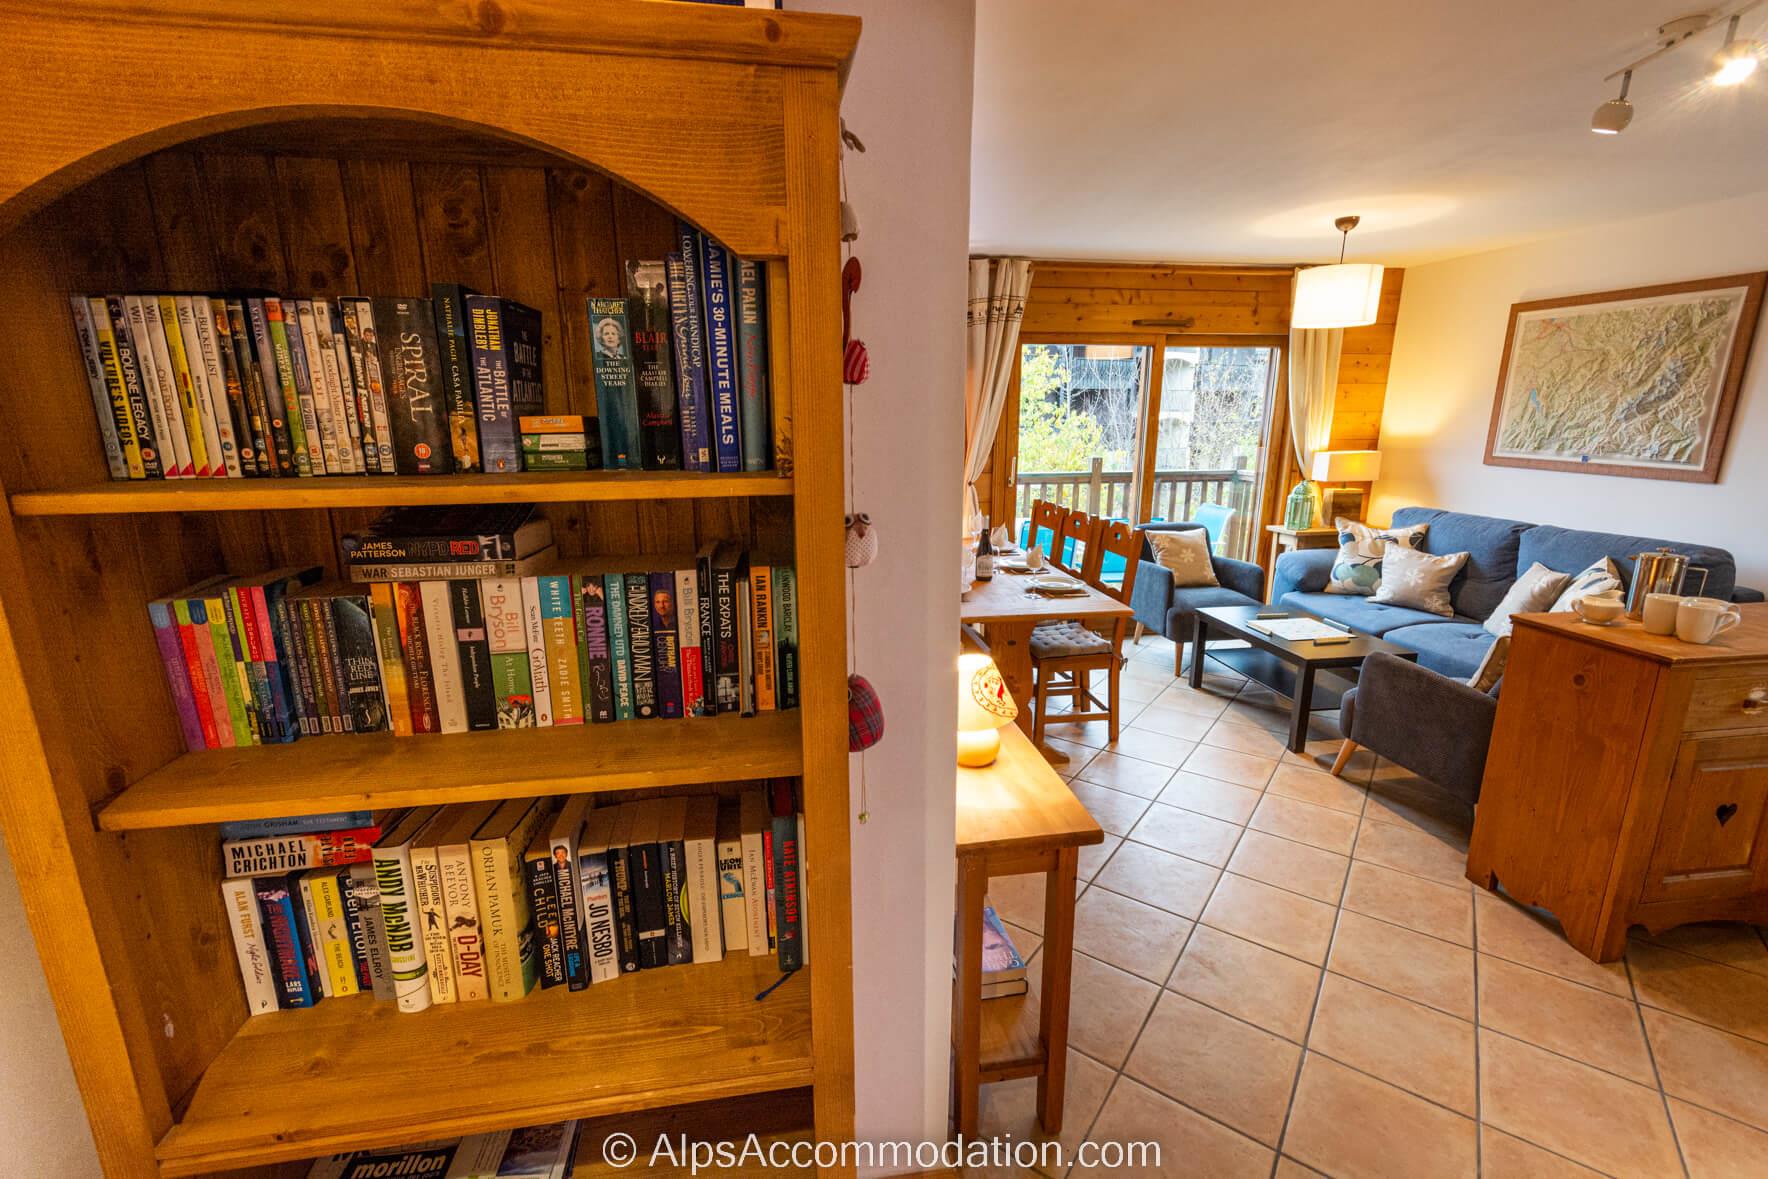 Ecrins Etoiles C15 Samoëns - Well equipped with books, DVDs and board games